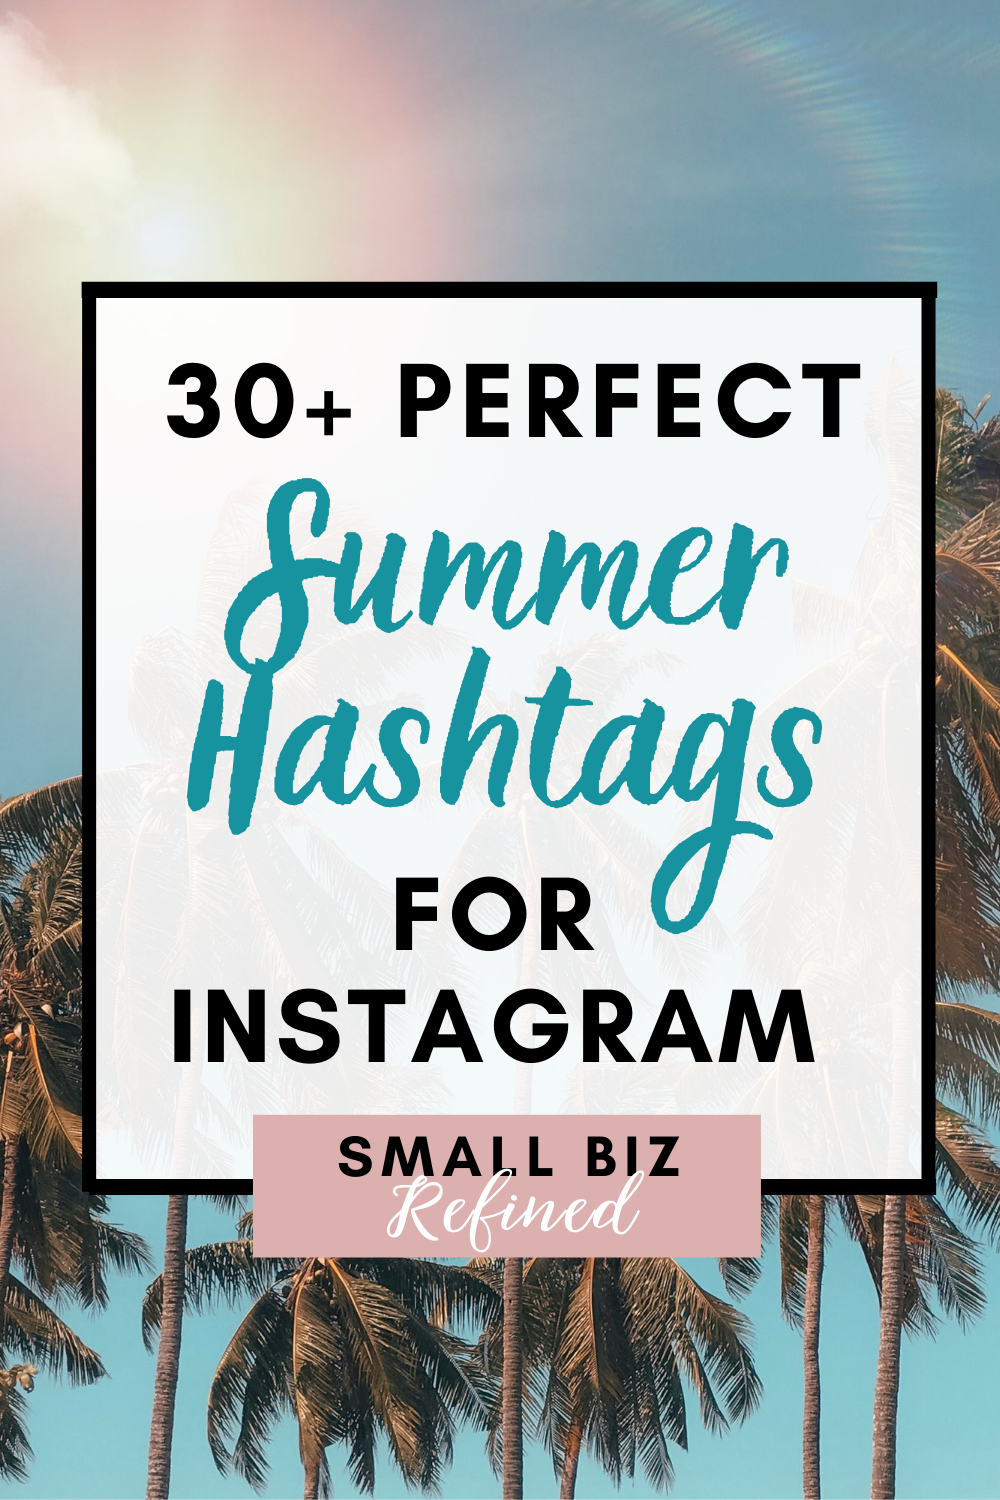 30+ Perfect Summer Hashtags for Instagram